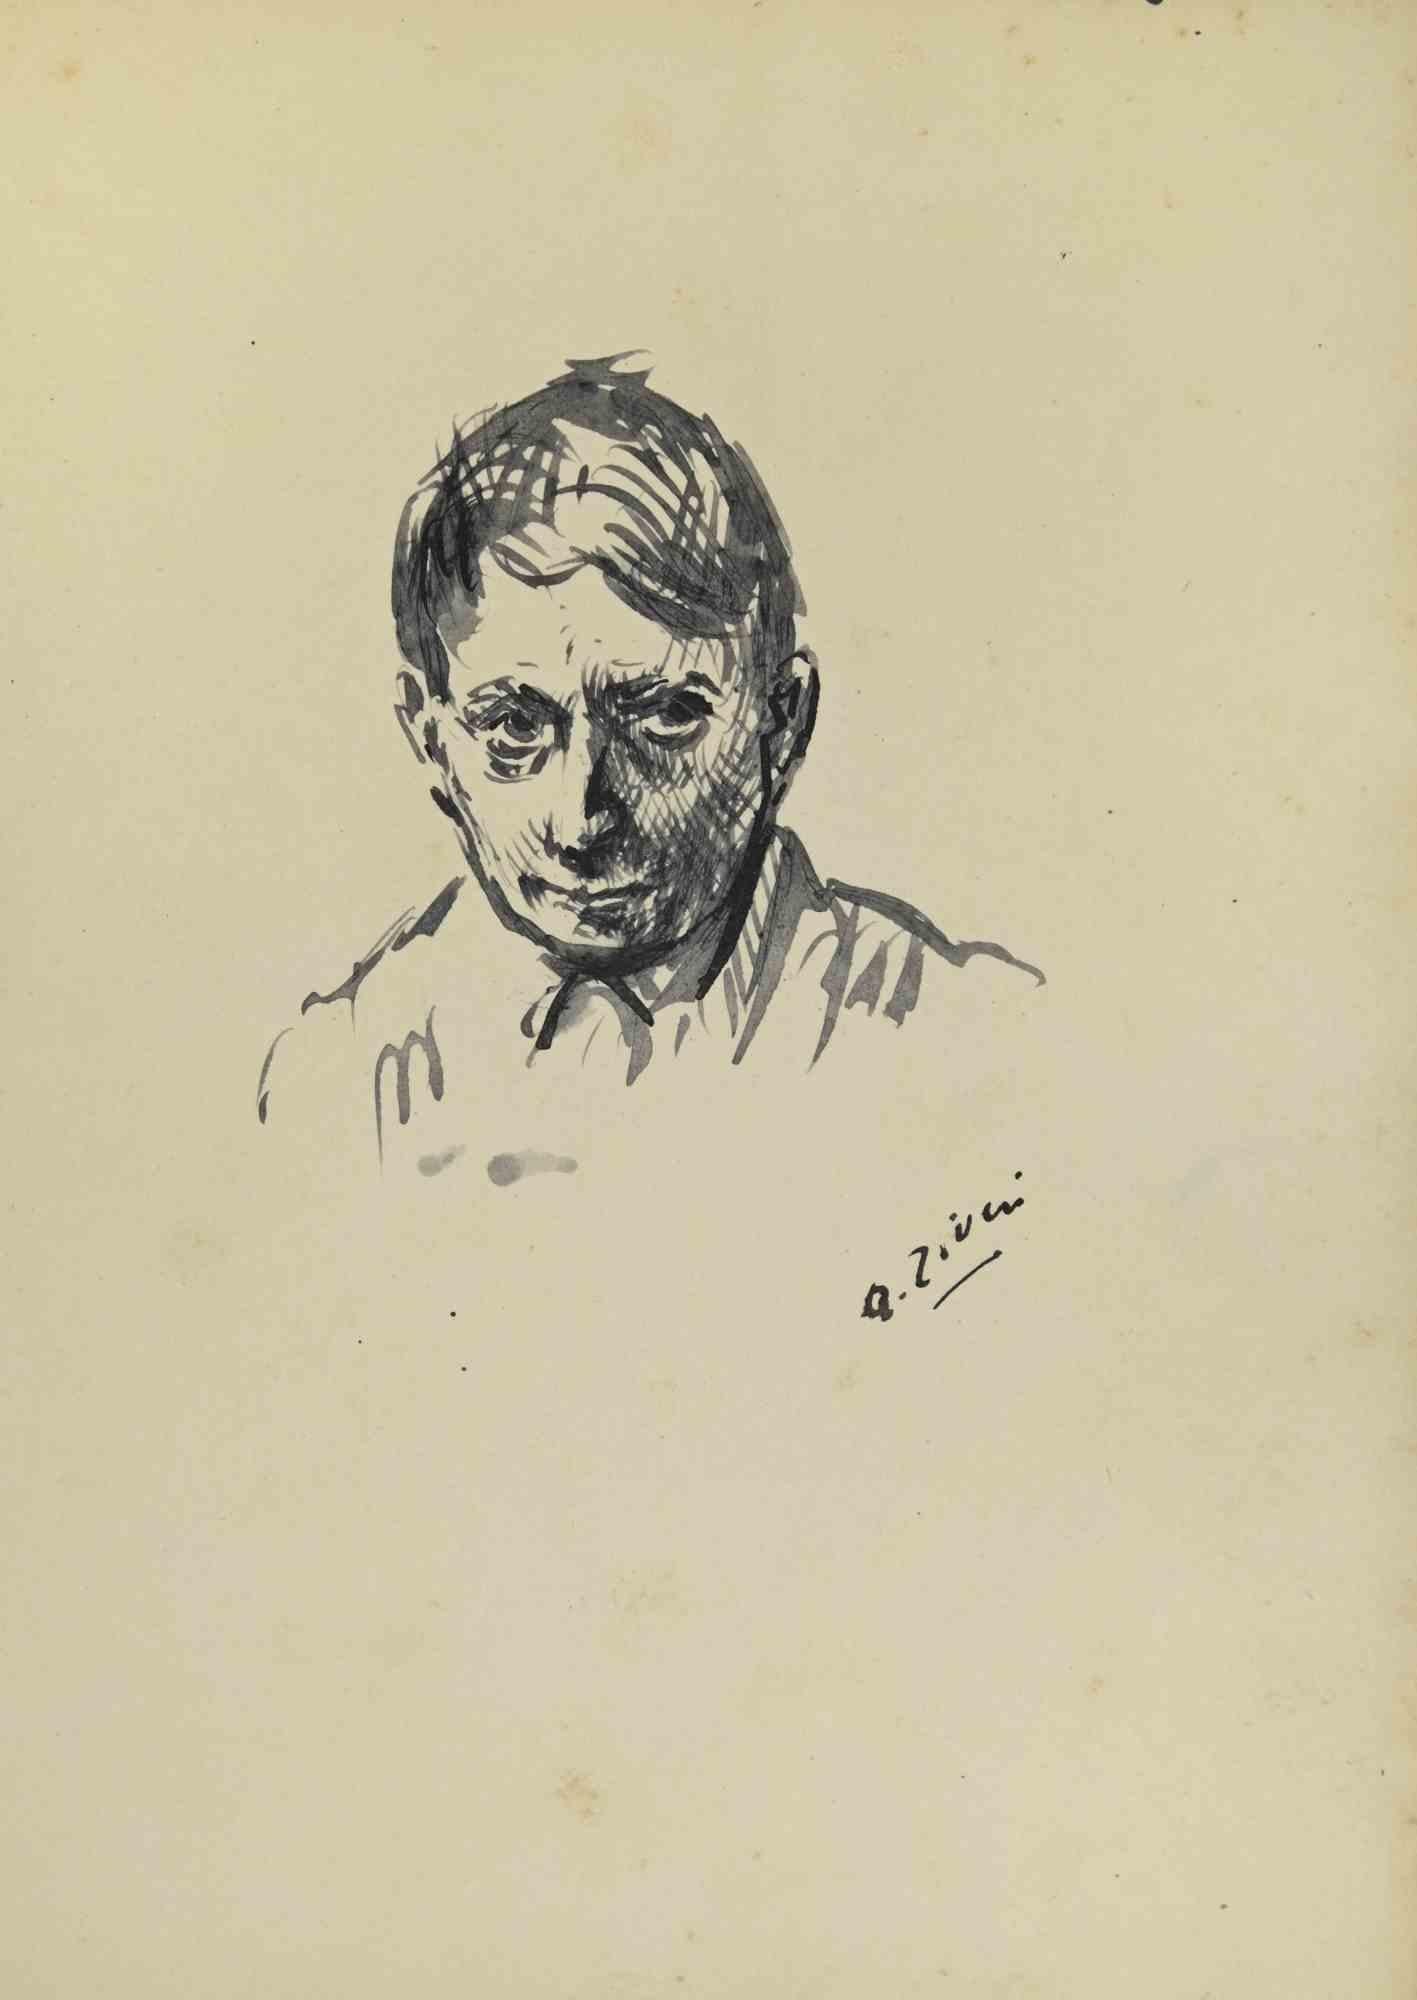 The Portrait is an original drawing realized by Alberto Ziveri in the 1930s.

Ink on paper.

Hand-signed.

In good conditions with slight foxing.

The artwork is represented through deft strokes masterly.

Alberto Ziveri (Rome,1908 – 1990), the